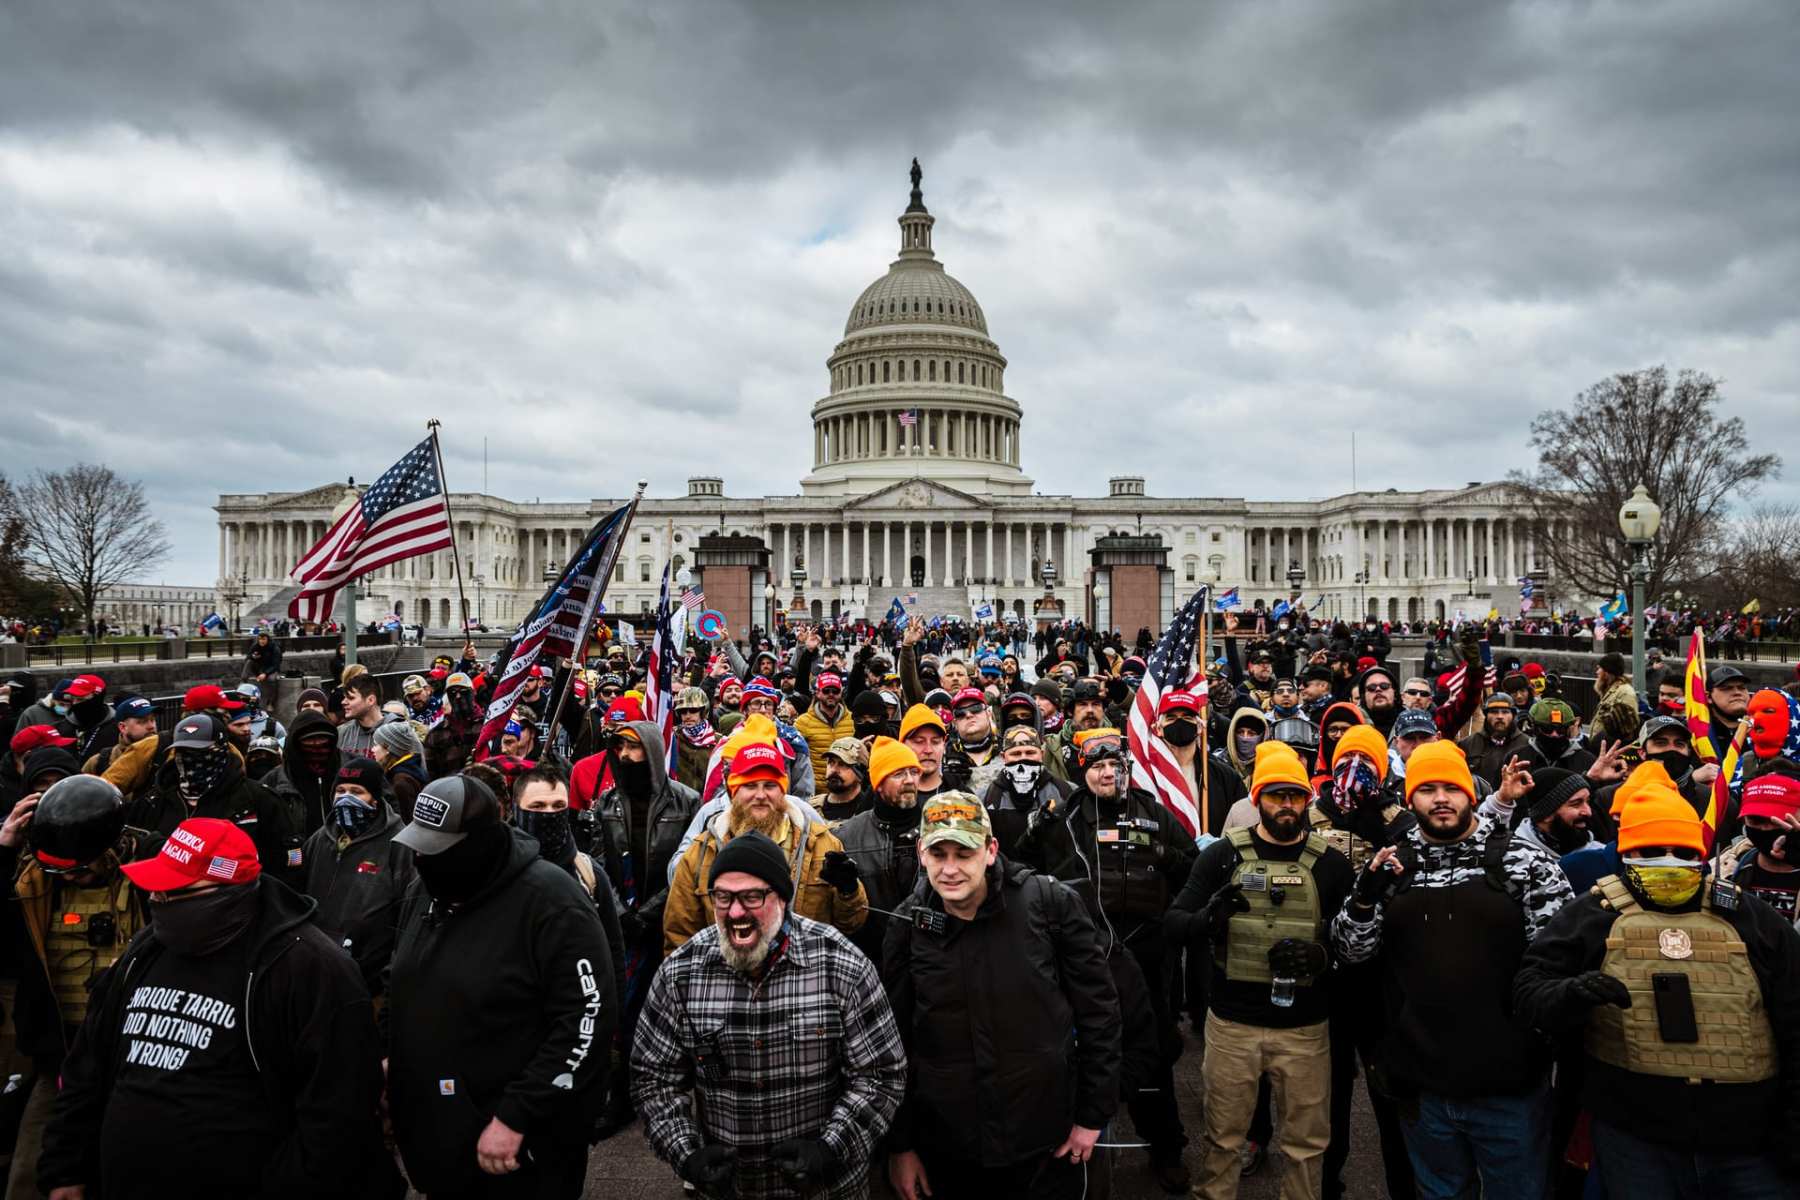 Pro-Trump protesters gather in front of the U.S. Capitol Building.